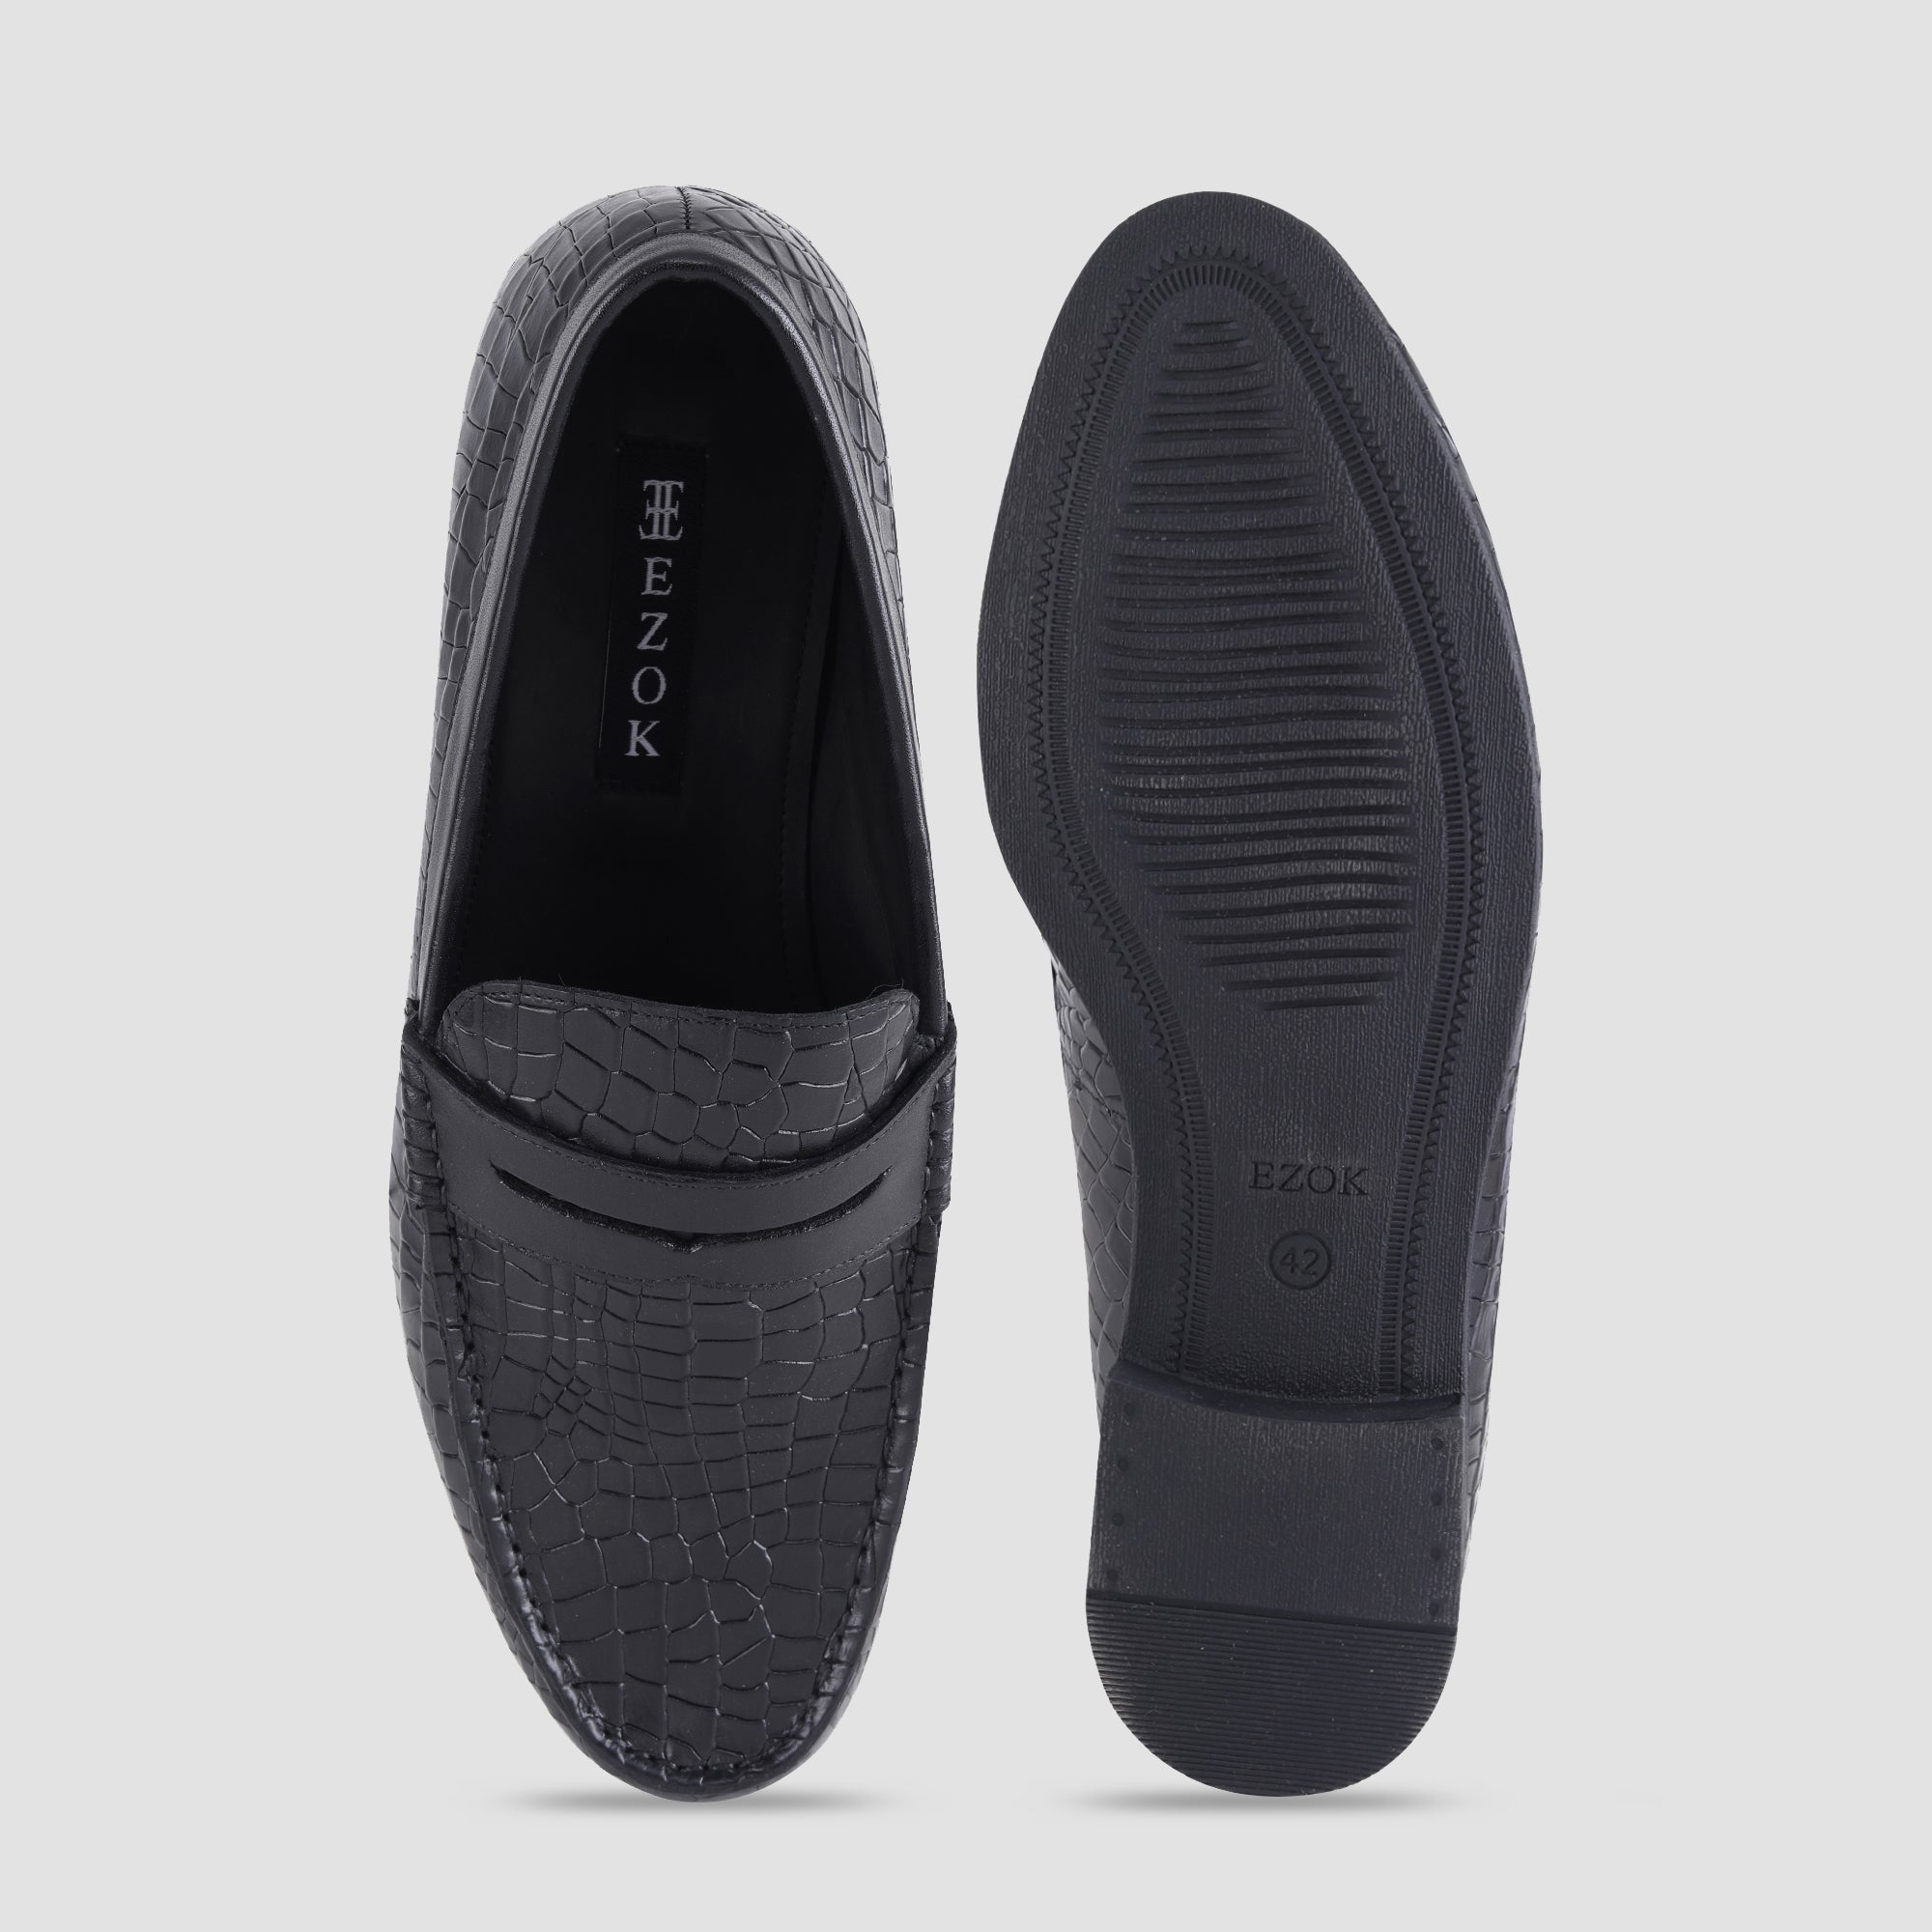 Ezok Leather Casual Shoes For Men